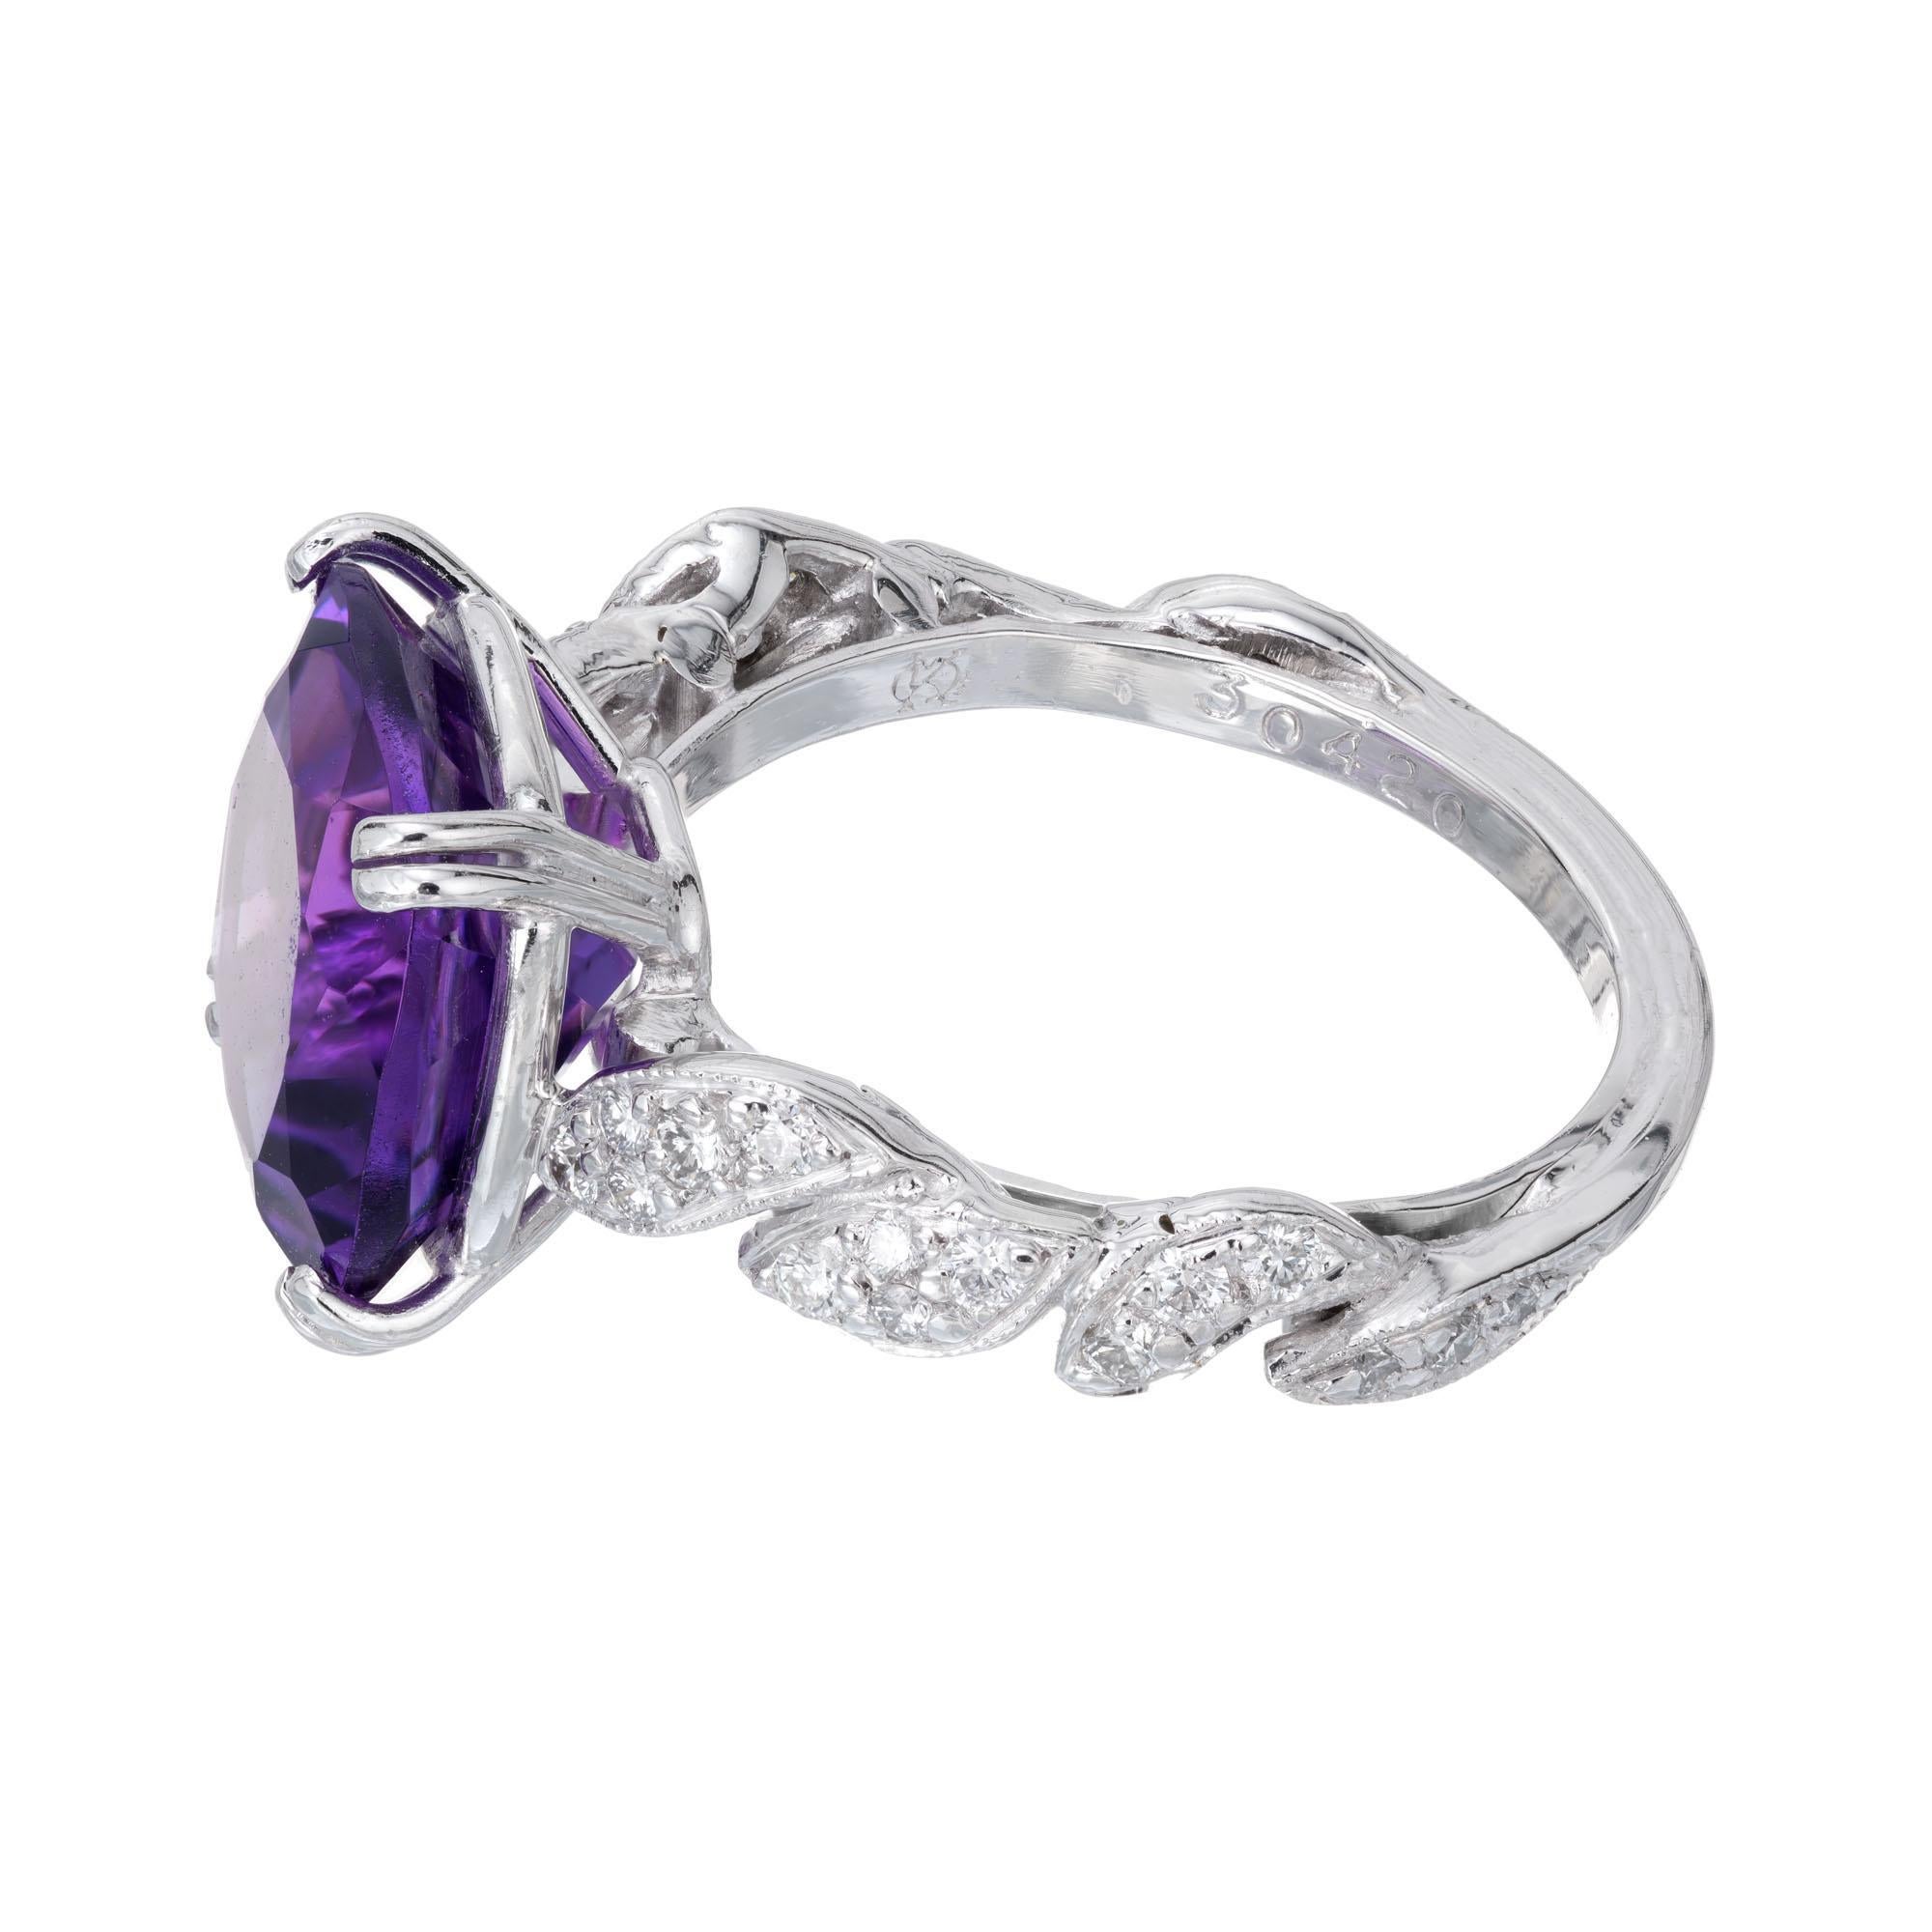 4.66 Carat Amethyst Diamond Platinum Cocktail Ring In Excellent Condition For Sale In Stamford, CT